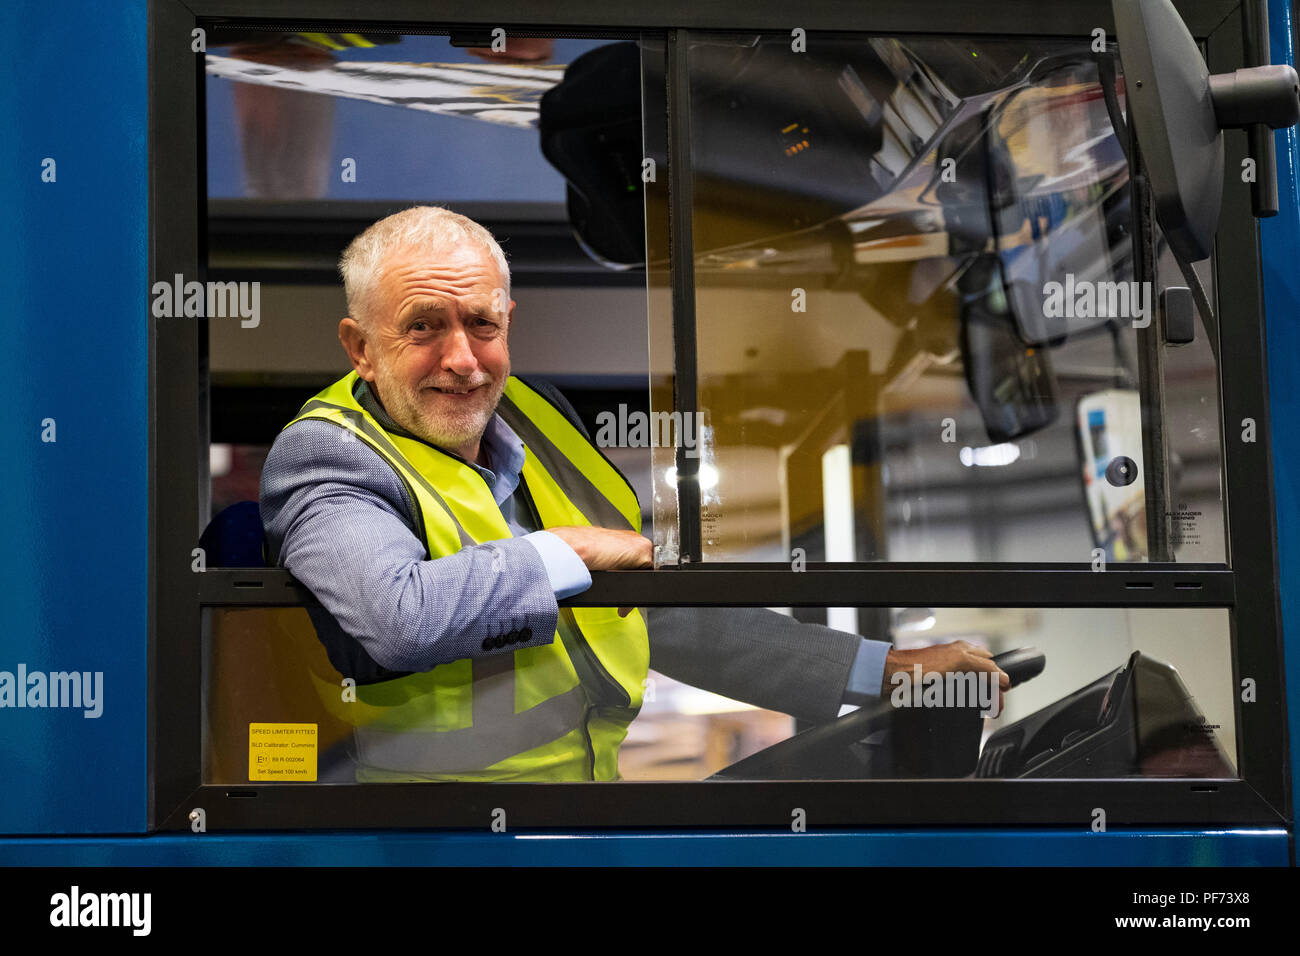 Falkirk, Scotland, UK; 20 August, 2018. Labour Leader Jeremy Corbyn and Scottish Labour Leader Richard Leonard visit Alexander Dennis bus manufacturers in Falkirk as part of Labour's "Build it in Britain" policy. Credit: Iain Masterton/Alamy Live News Stock Photo